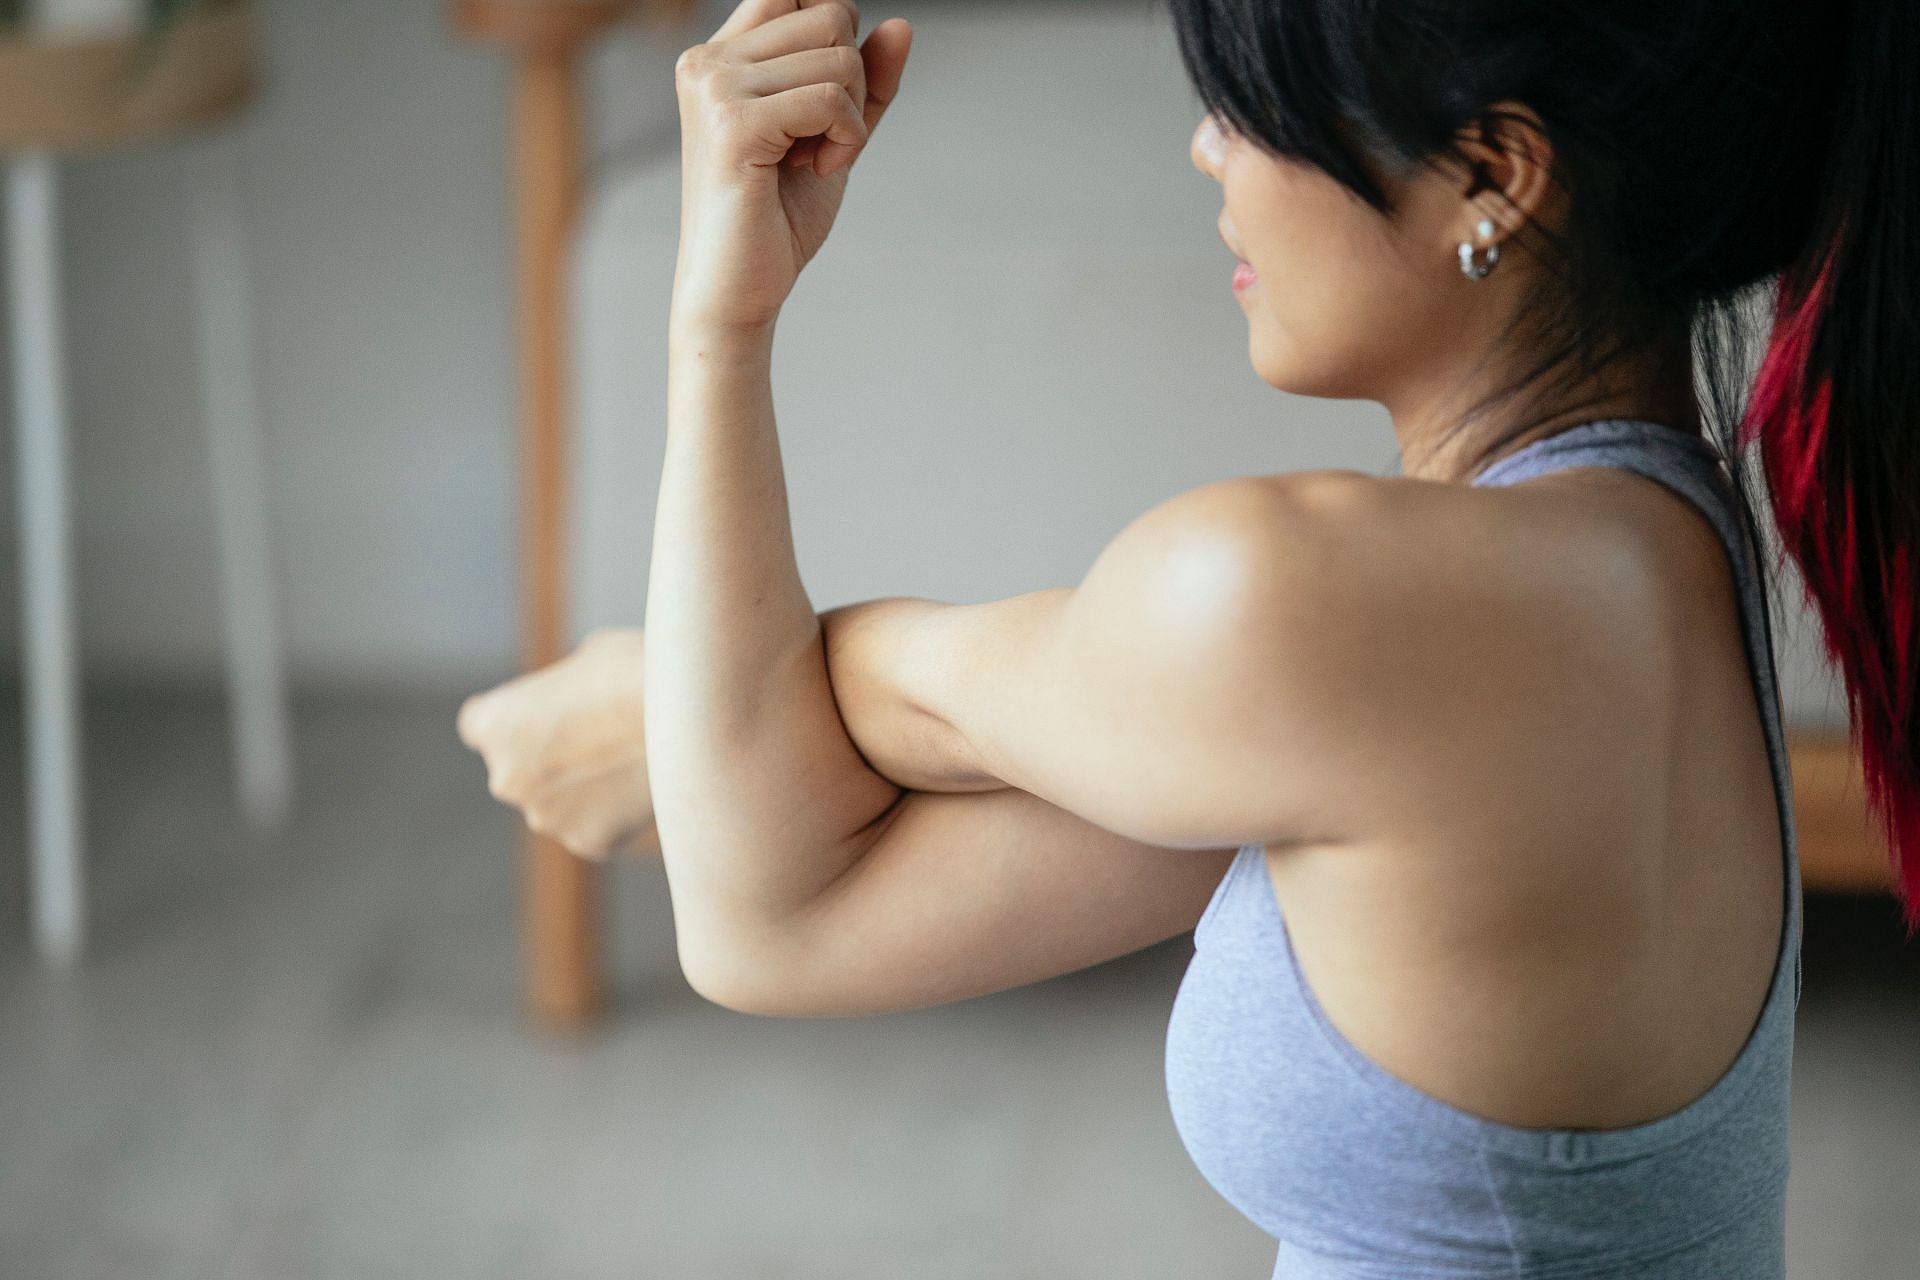 Exercises can trengthen the arm muscles and help lose fat (Image via Pexels/ Miriam Alonso)